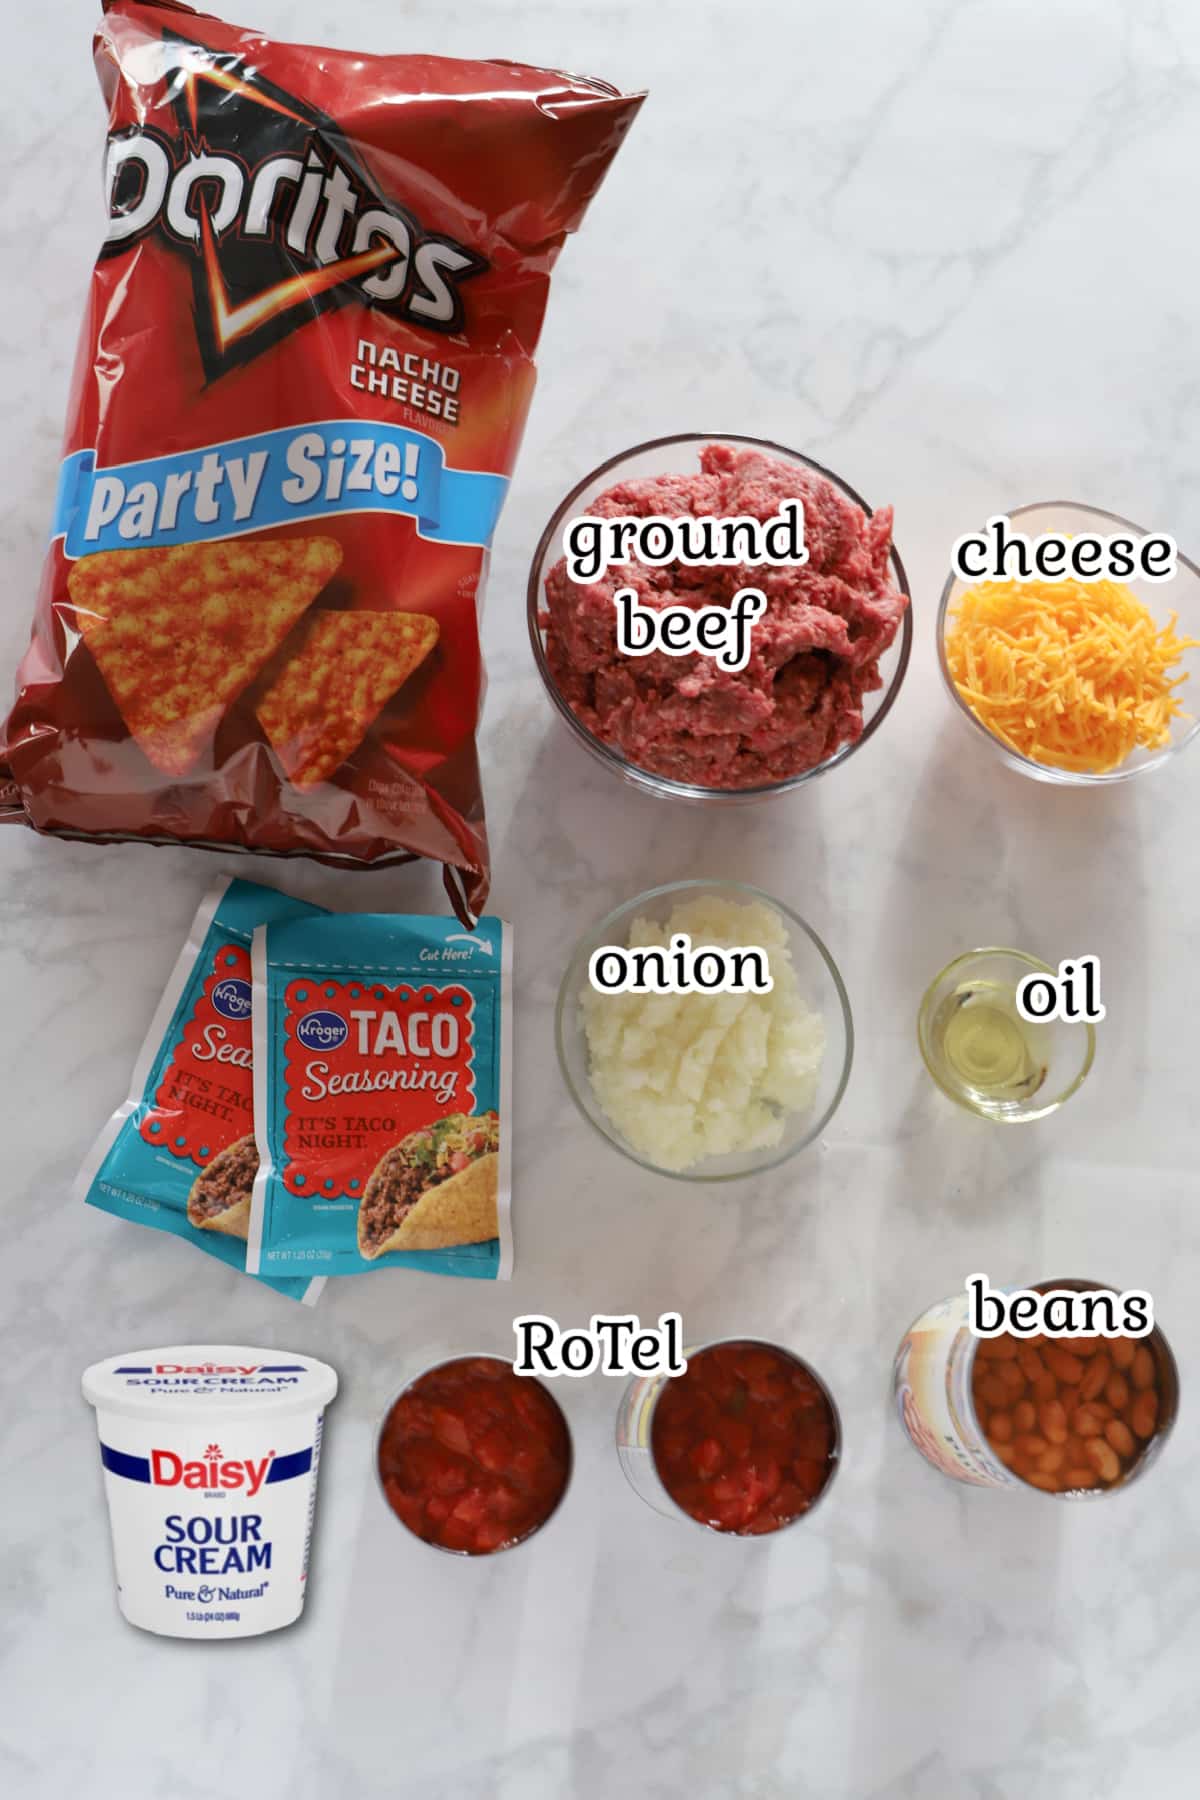 Ingredients for this recipe on a white counter.